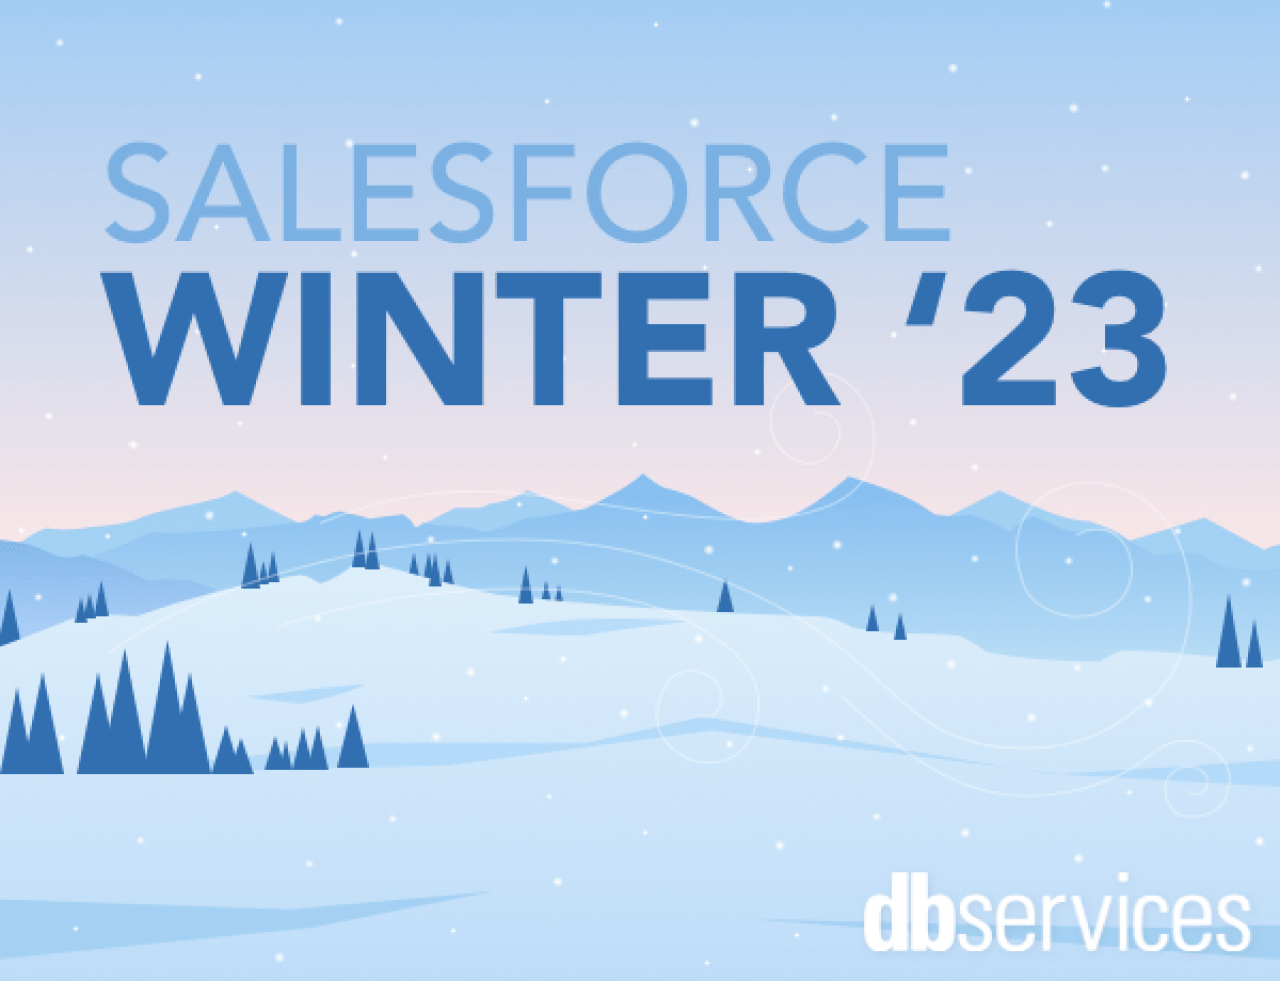 salesforce winter 23 release highlights db services.